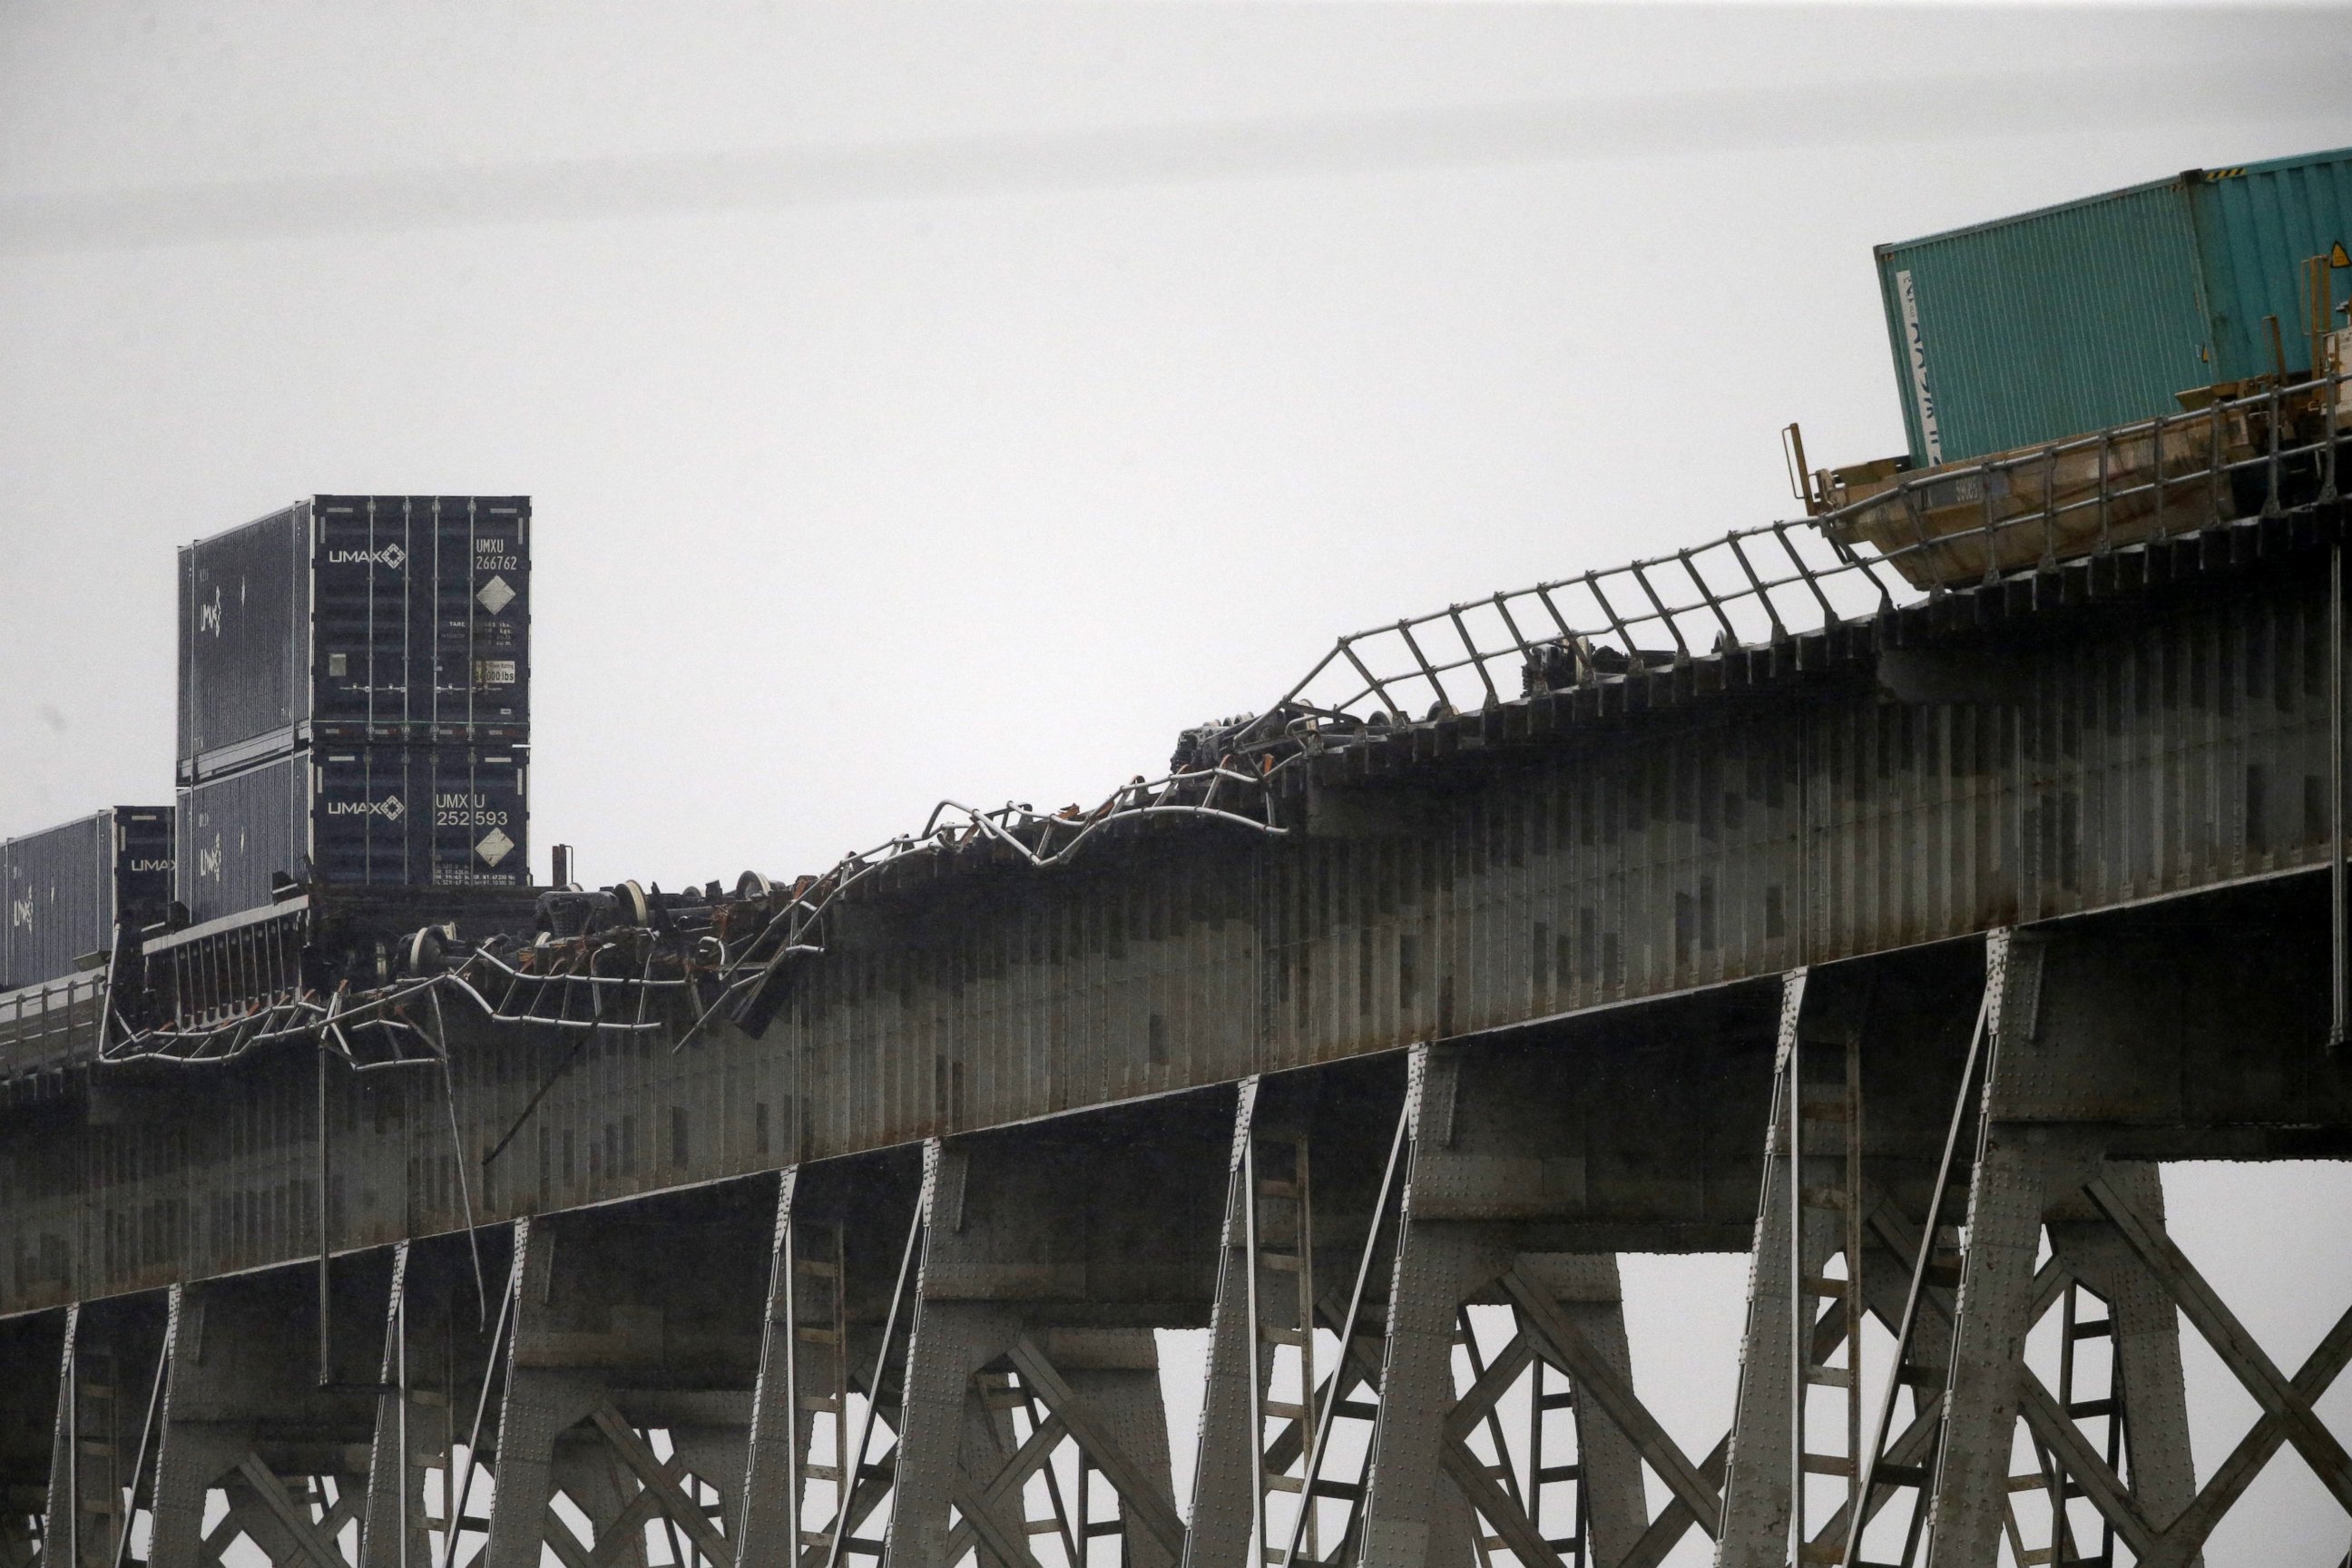 PHOTO: Broken railing and train cars are seen on the Huey P. Long Bridge, which crosses over the Mississippi River, after several cars toppled from high winds in Jefferson Parish, La., just outside New Orleans, April 27, 2015.